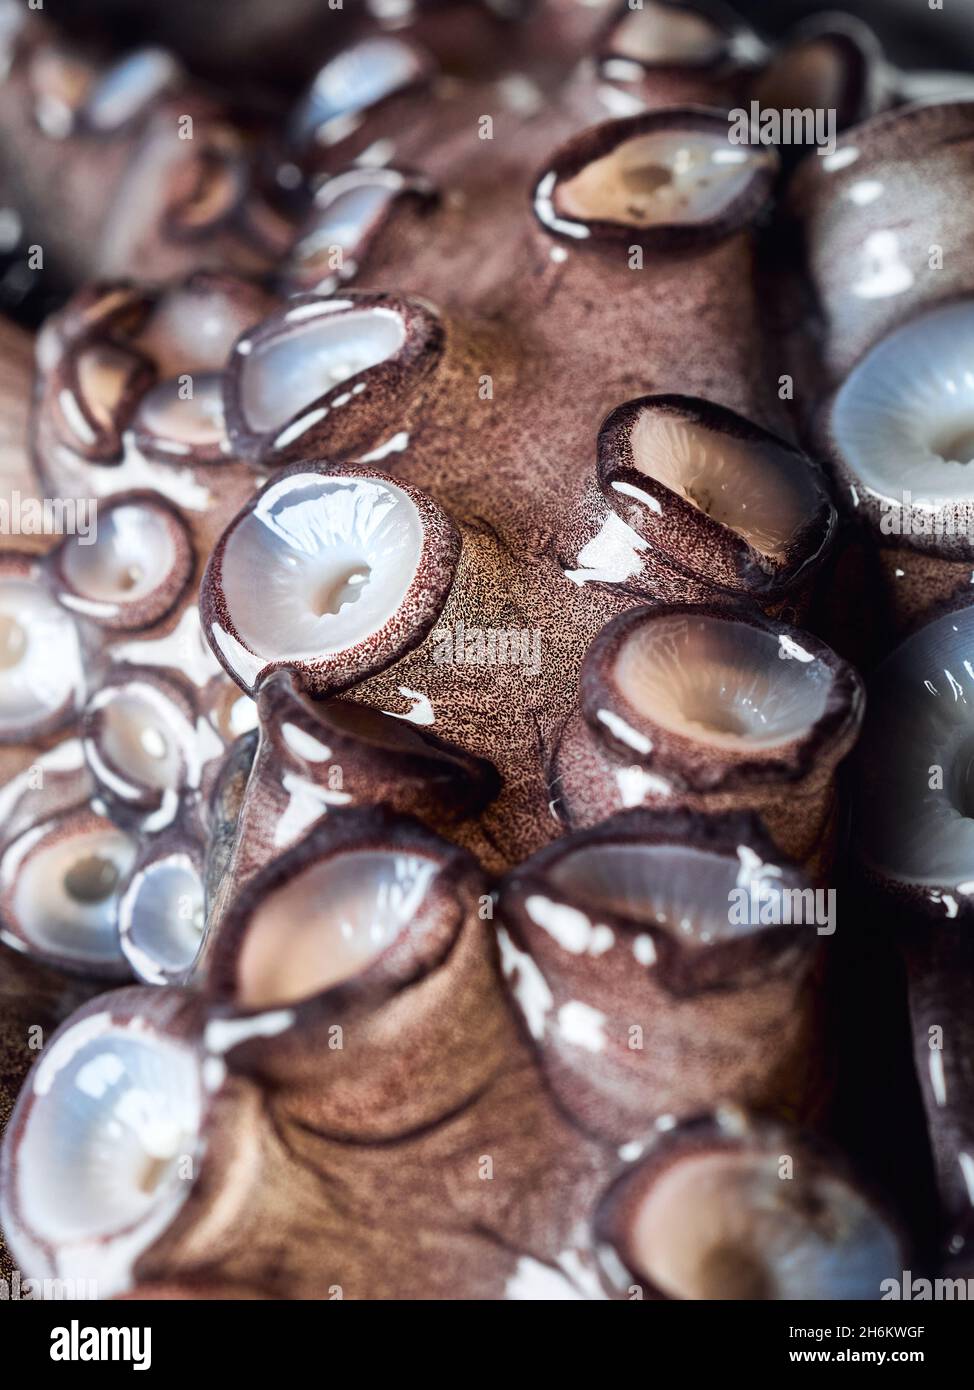 Raw octopus with suckers, extreme close up look, no people, vertical image Stock Photo